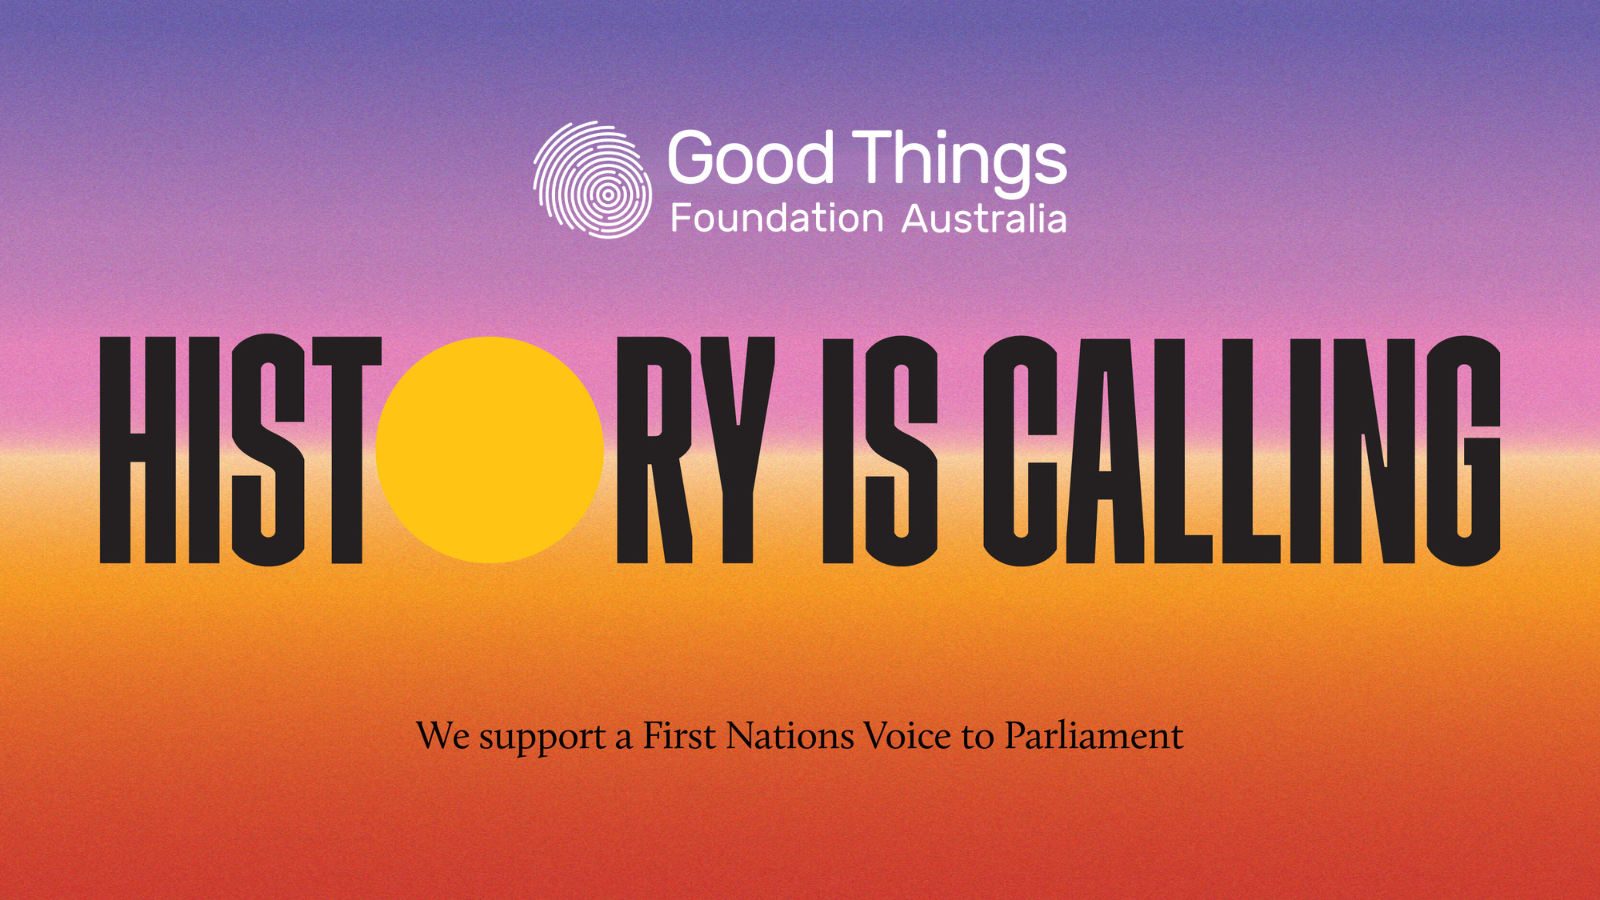 History is Calling. We support the First Nations Voice to Parliament. Good Things Foundation Australia logo